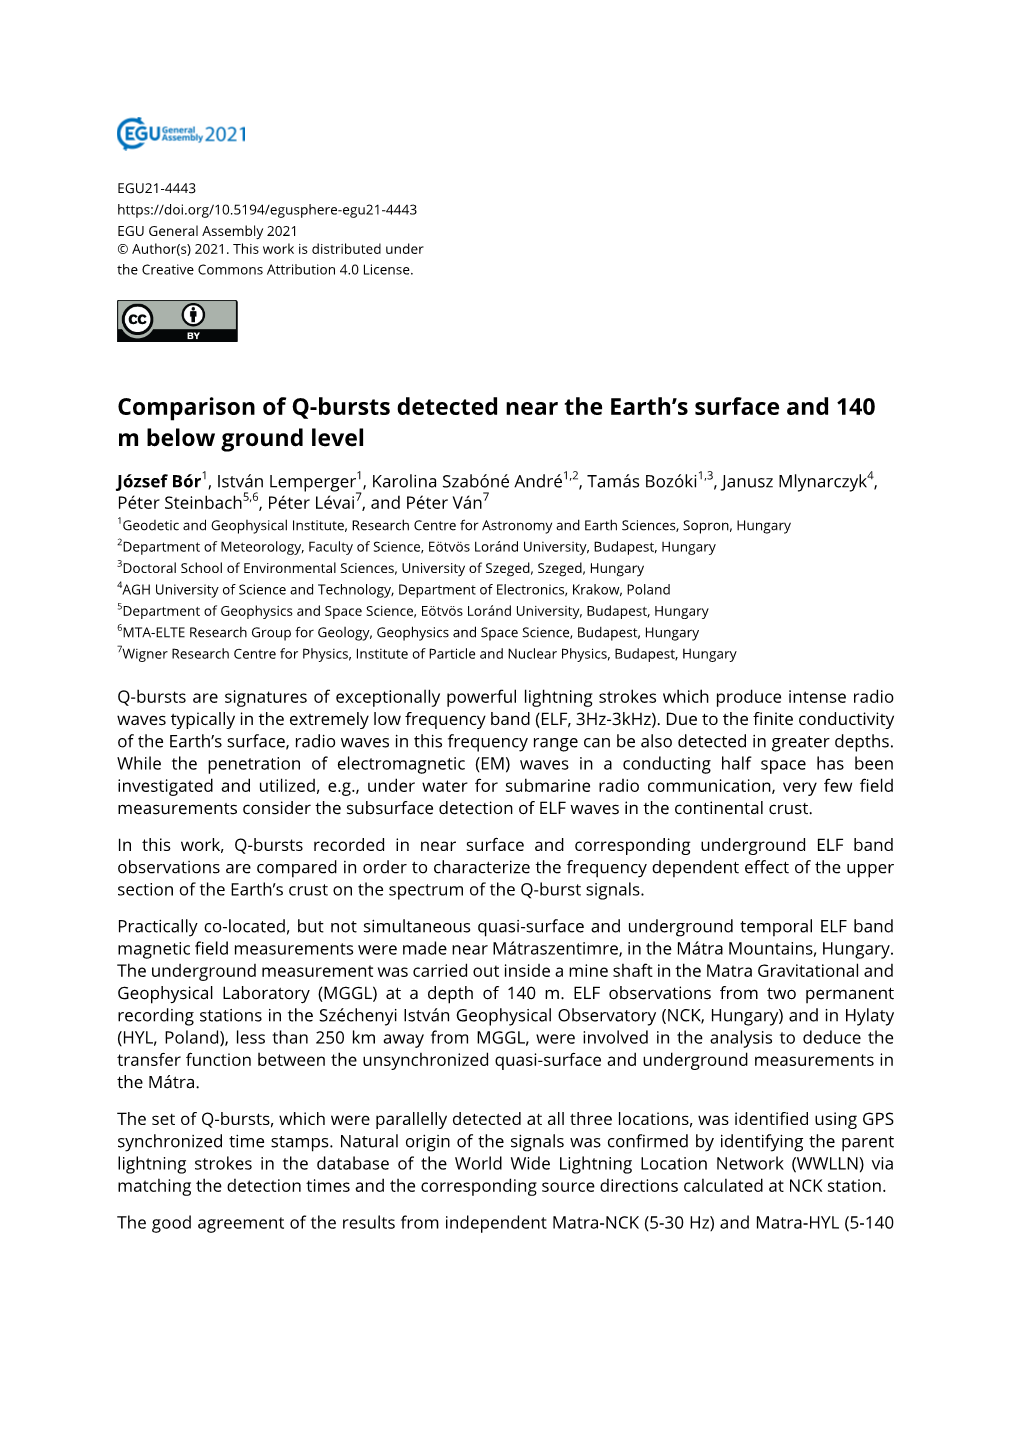 Comparison of Q-Bursts Detected Near the Earth's Surface and 140 M